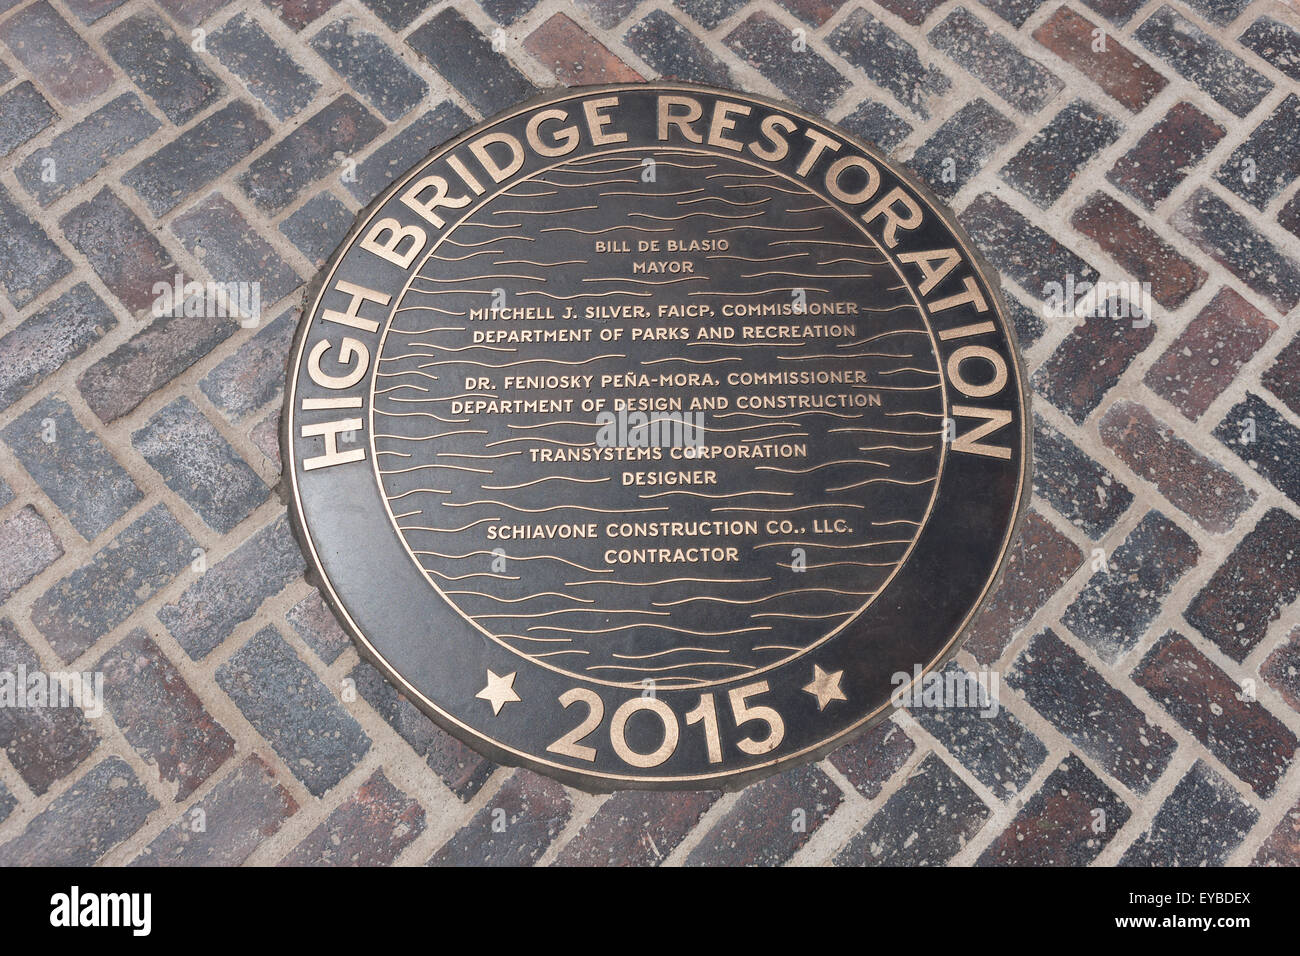 Bronze medallion in the walkway of the High Bridge connecting Manhattan with the Bronx over the Harlem River in New York City. Stock Photo